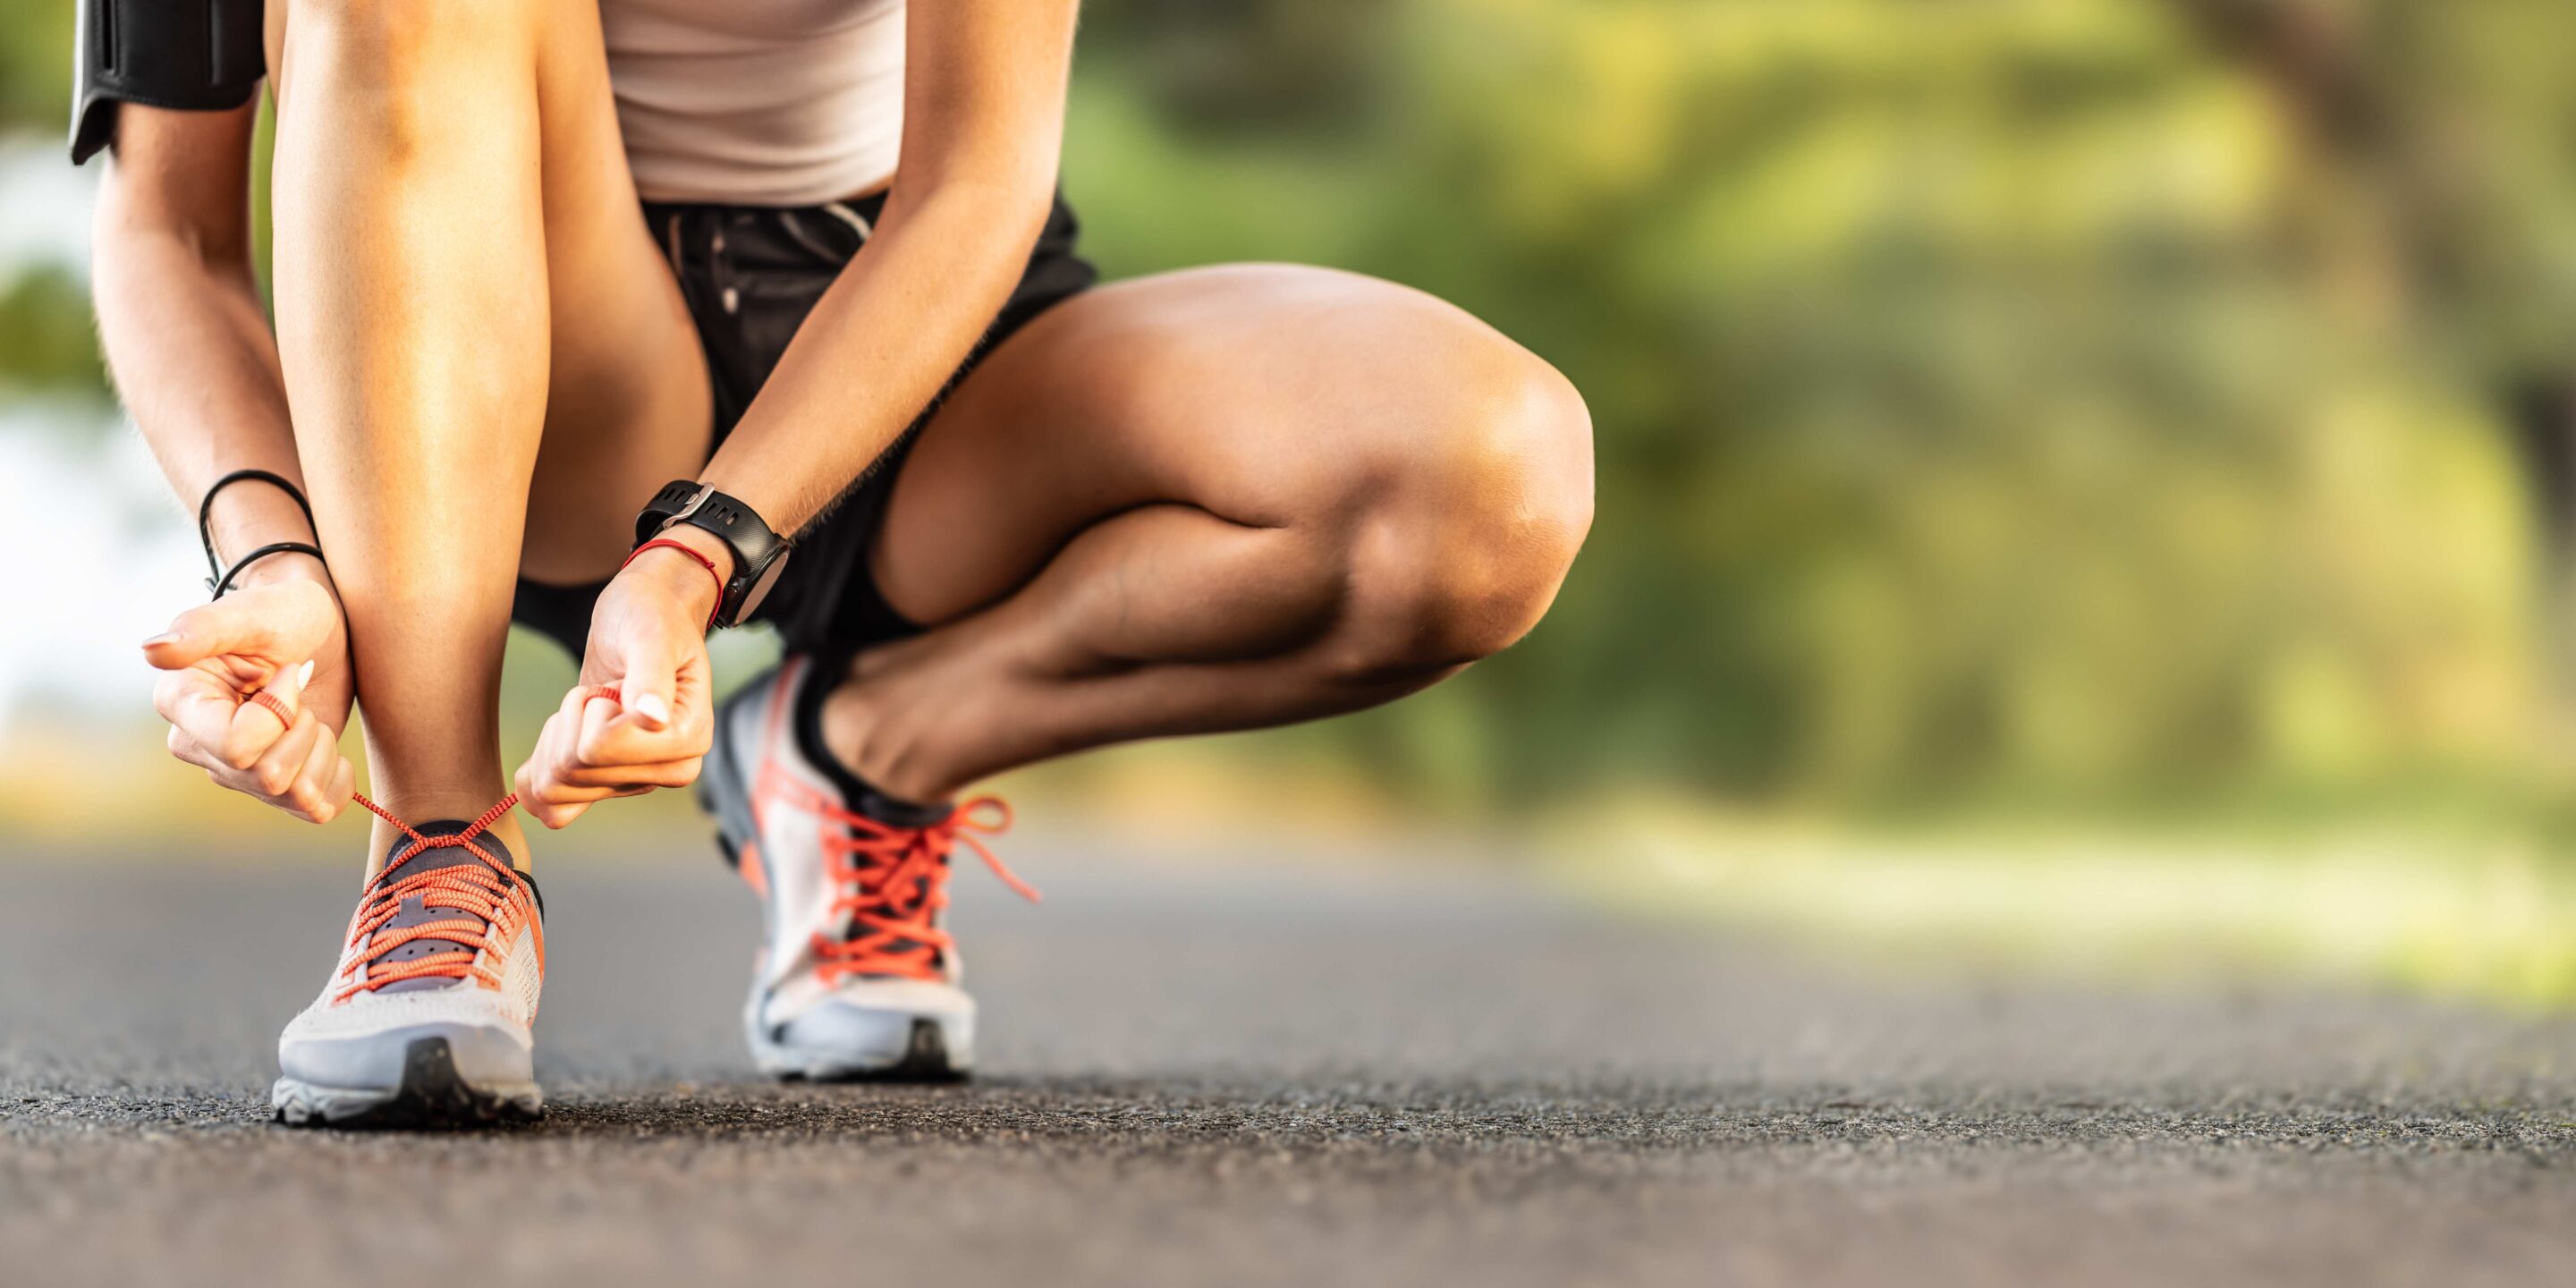 Woman runner tying shoelace ready to run on road